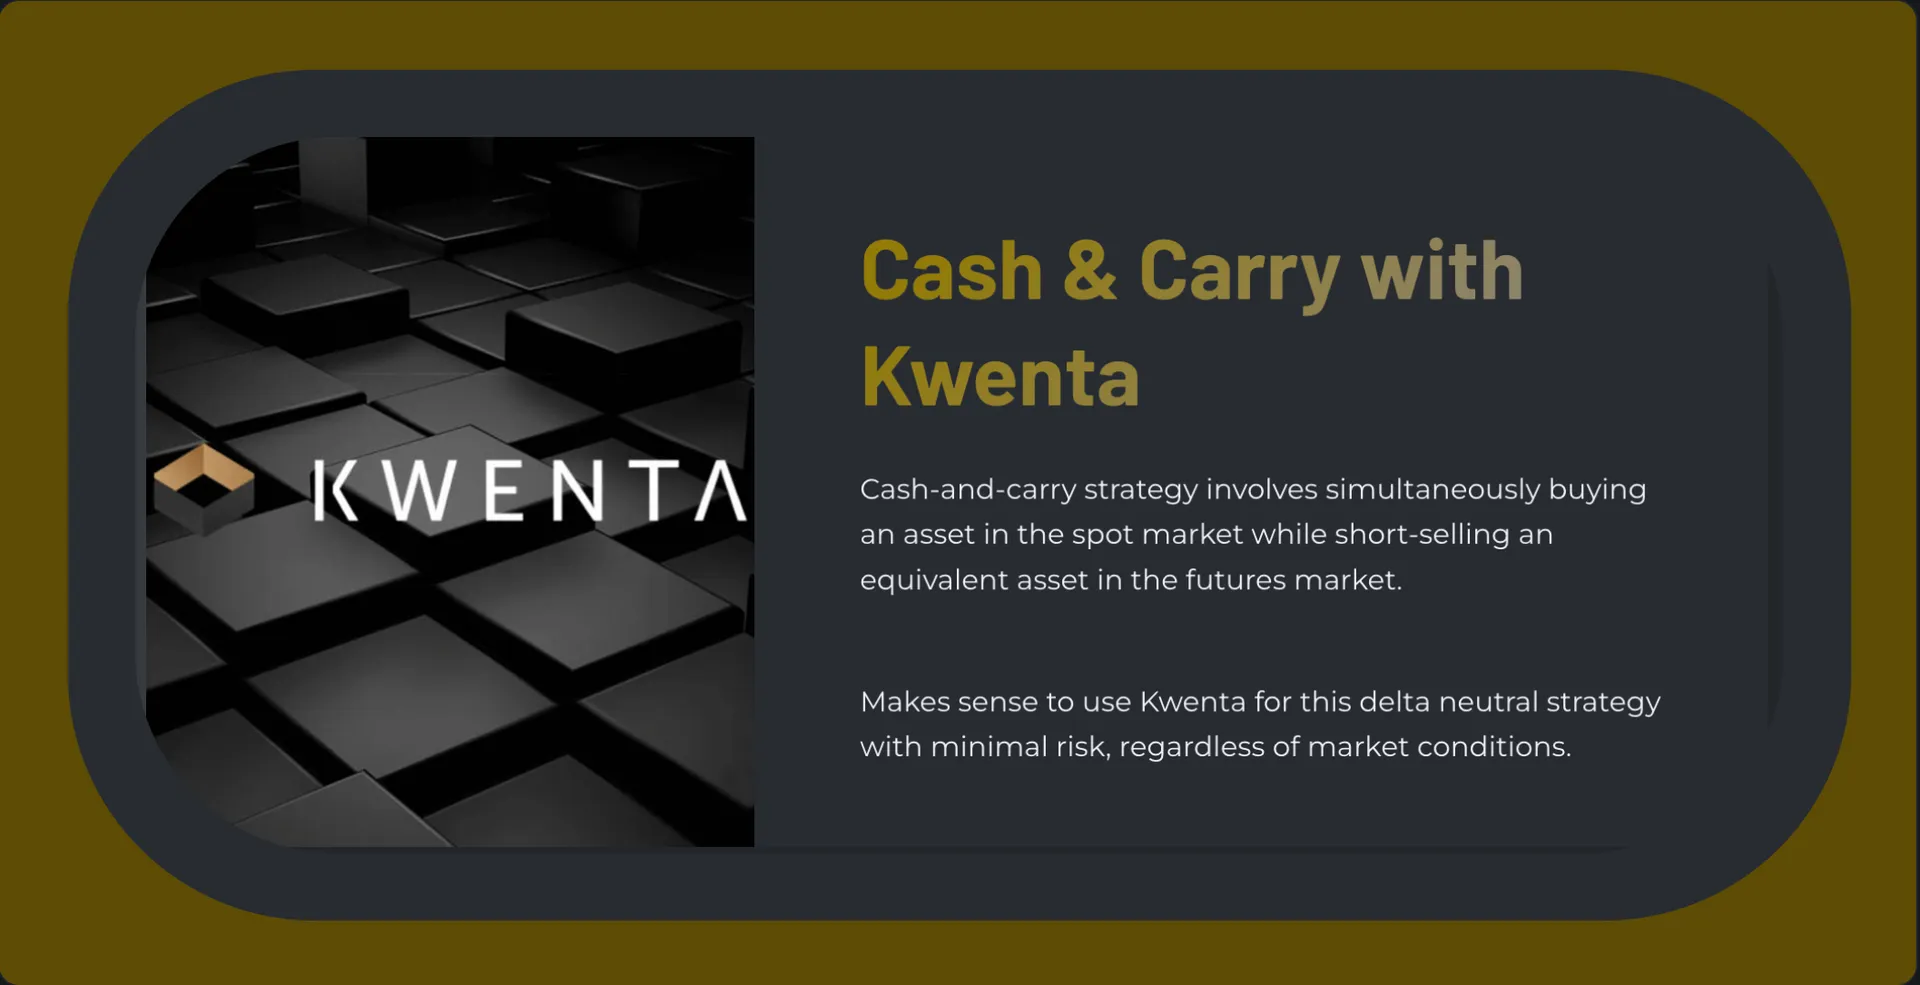 Let's dive into cash-and-carry trading, and the funding rate, and use @Kwenta_io to make the most of these opportunities

Have tried explaining it through this slide deck 👇🏿

So, if you're ready to level up your crypto trading game, hit that follow button, and let's get started!

https://twitter.com/EverythingB0x/status/1699733465695146408?s=20